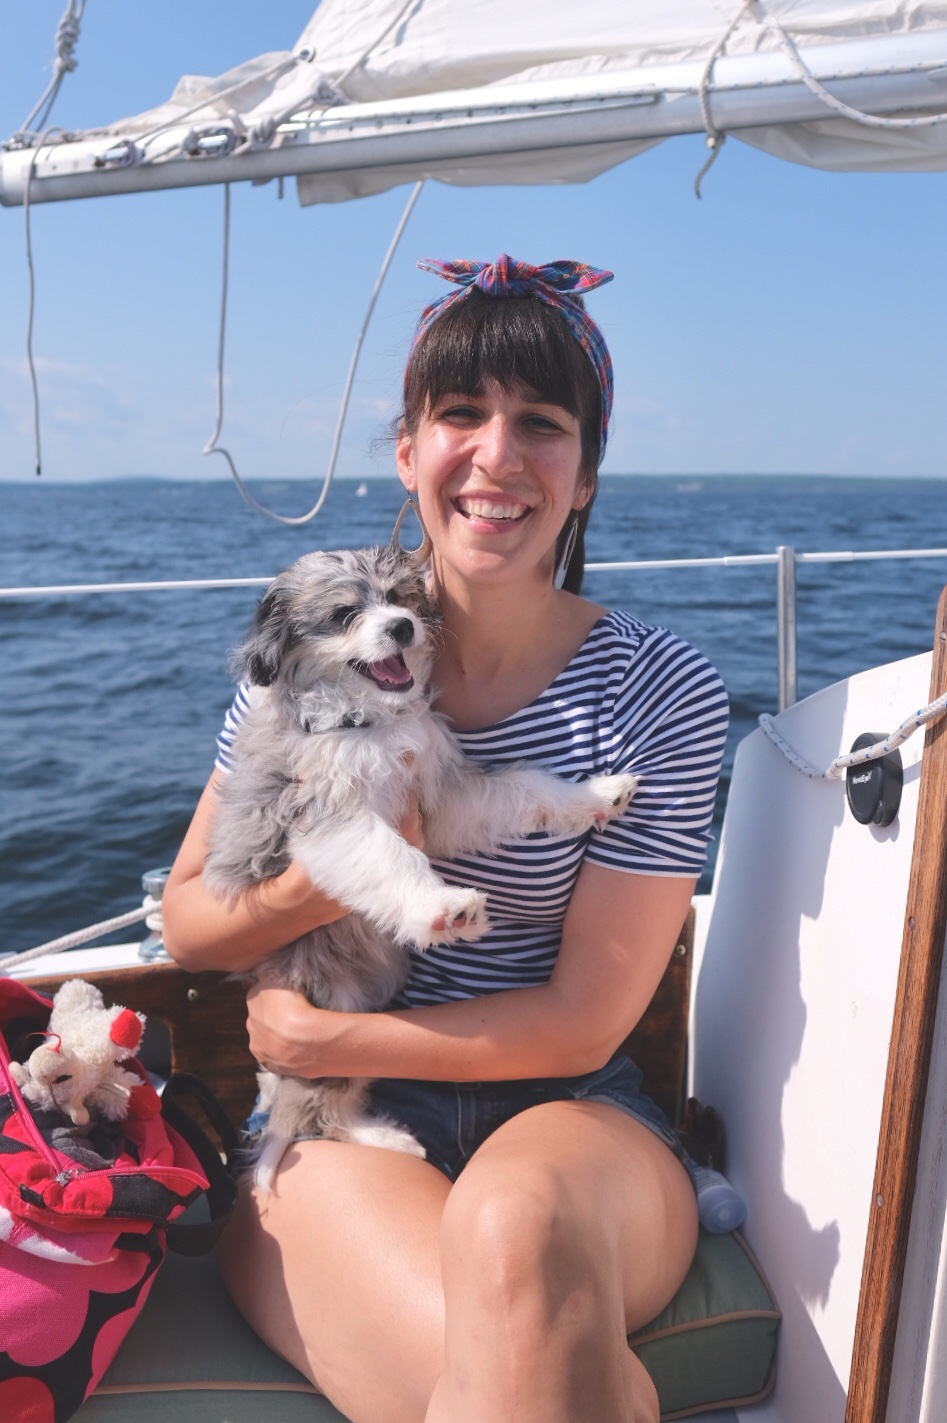 Smiling woman on a sailboat wearing headband with smiling AussieDoodle puppy.